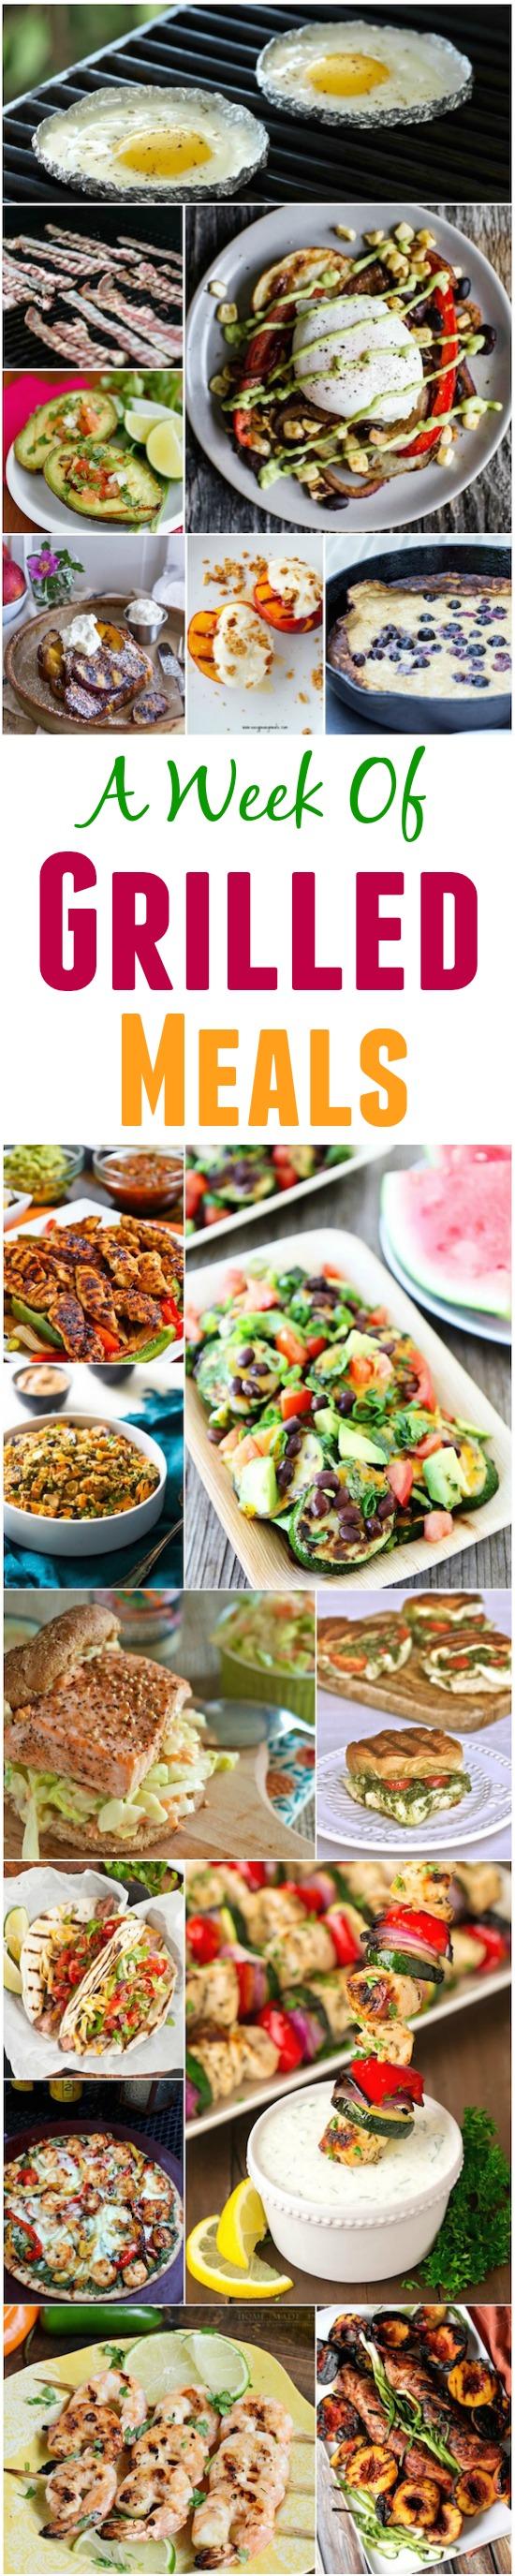 A Week of Grilled Meals - recipes you can make for breakfast, lunch and dinner on the grill!